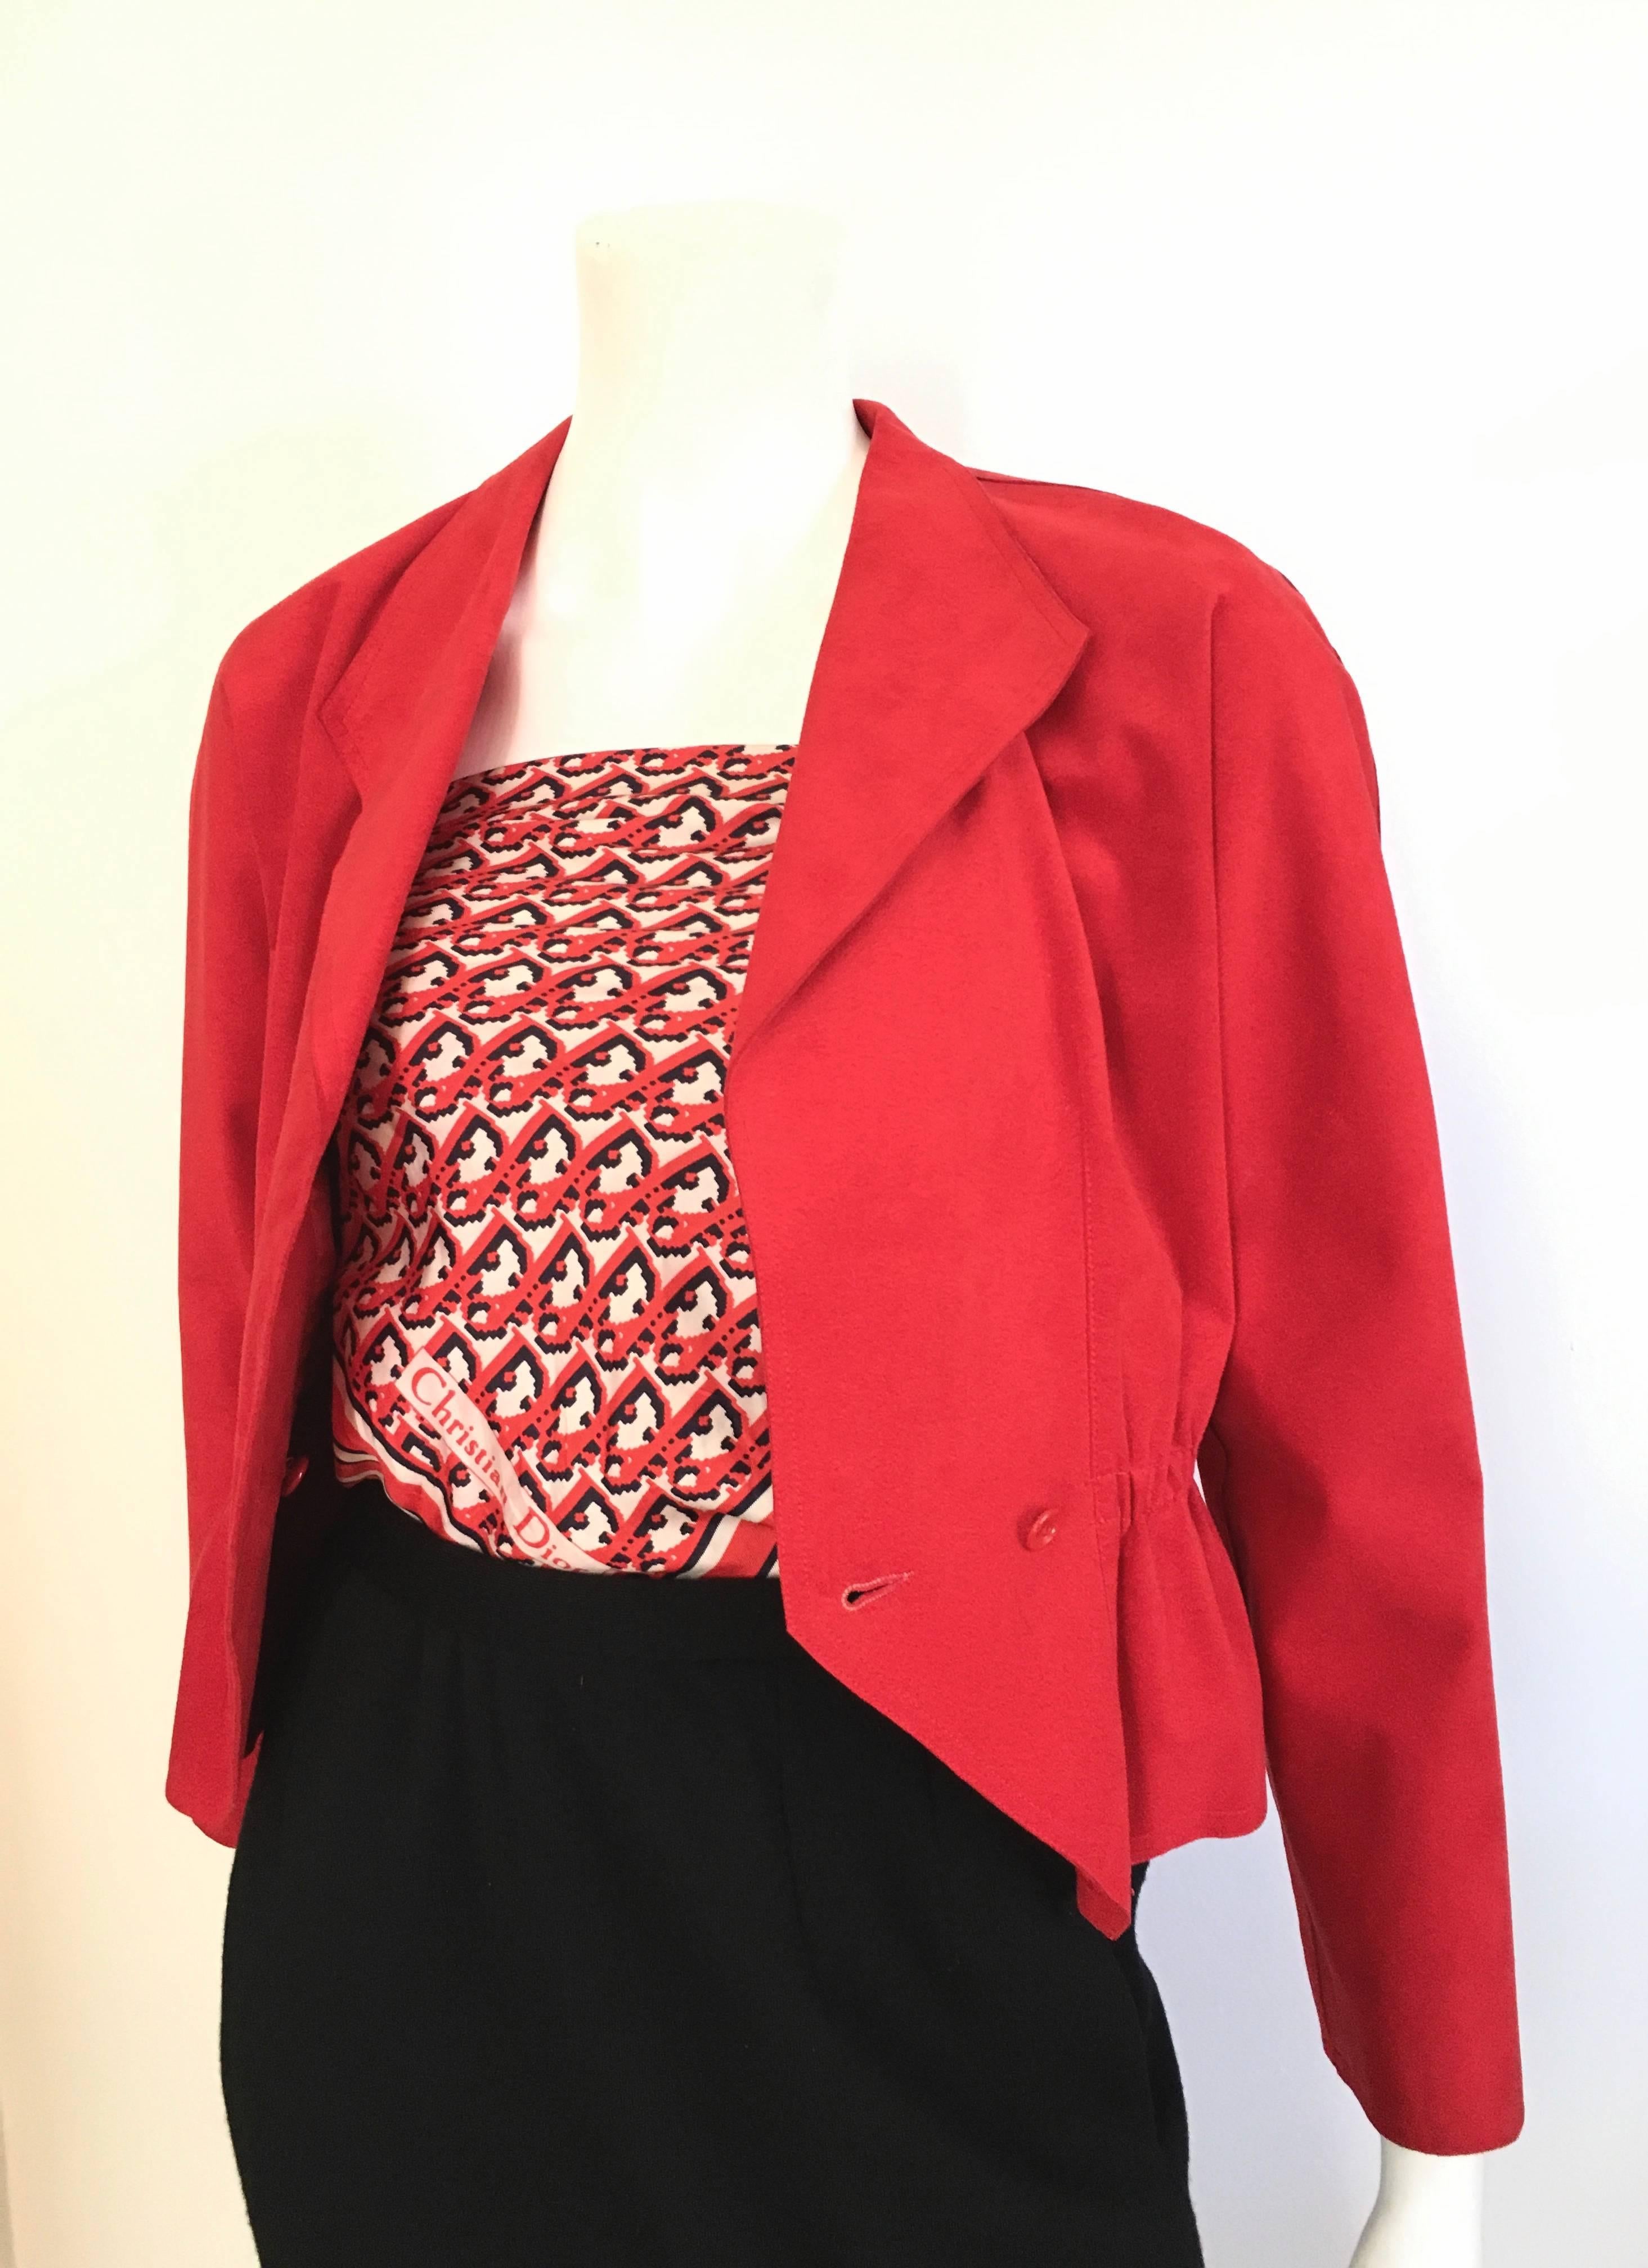 Halston 1970s Red Ultra Suede Peplum Jacket and Black Wool Pencil Skirt Size 4  im Angebot 1